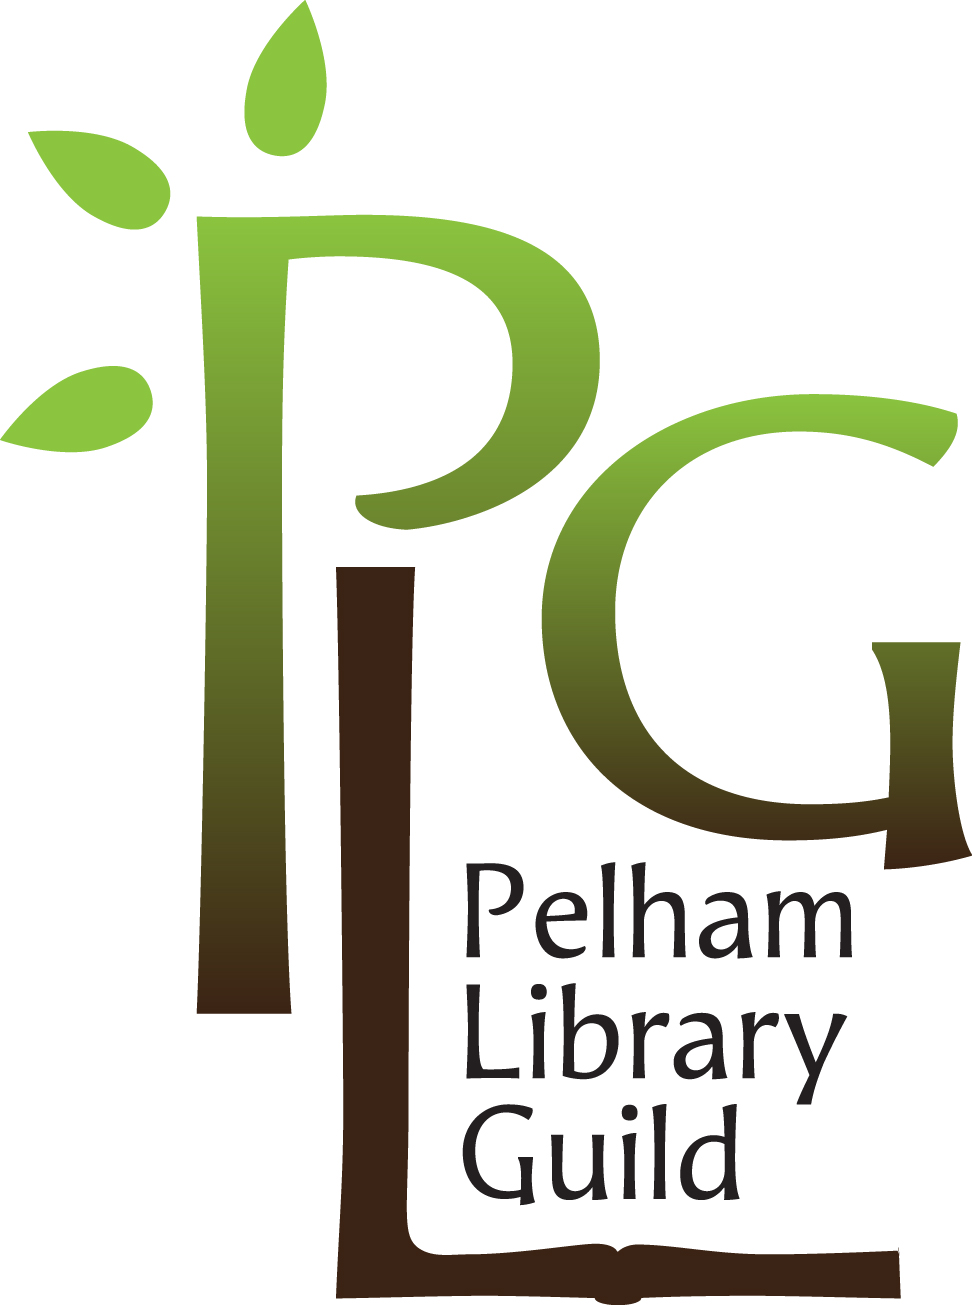 Logo: Uppercase letters P L G and text Pelham Library Guild on a white background